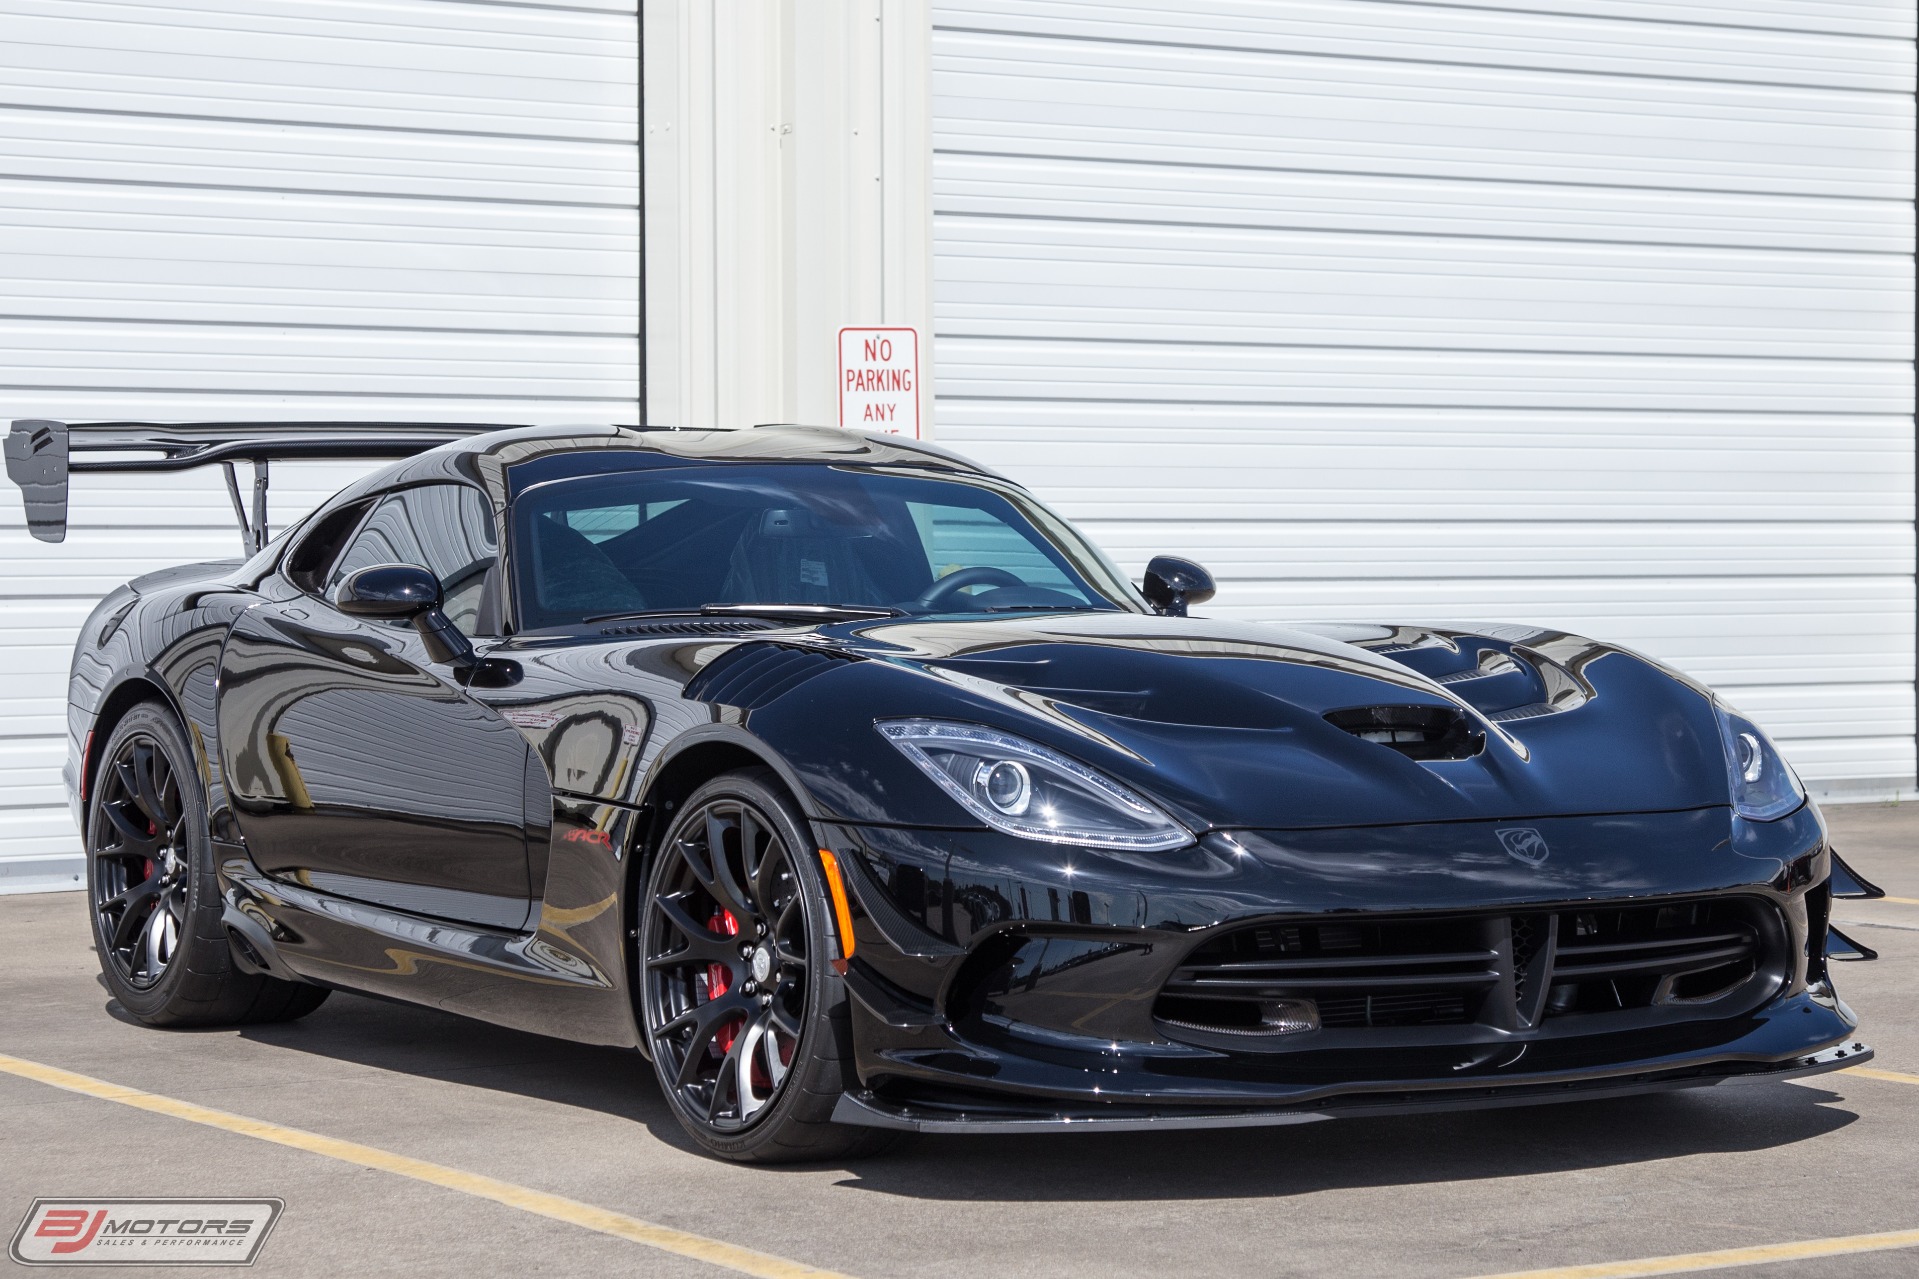 Used 2017 Dodge Viper Acr Extreme For Sale 169 995 Bj